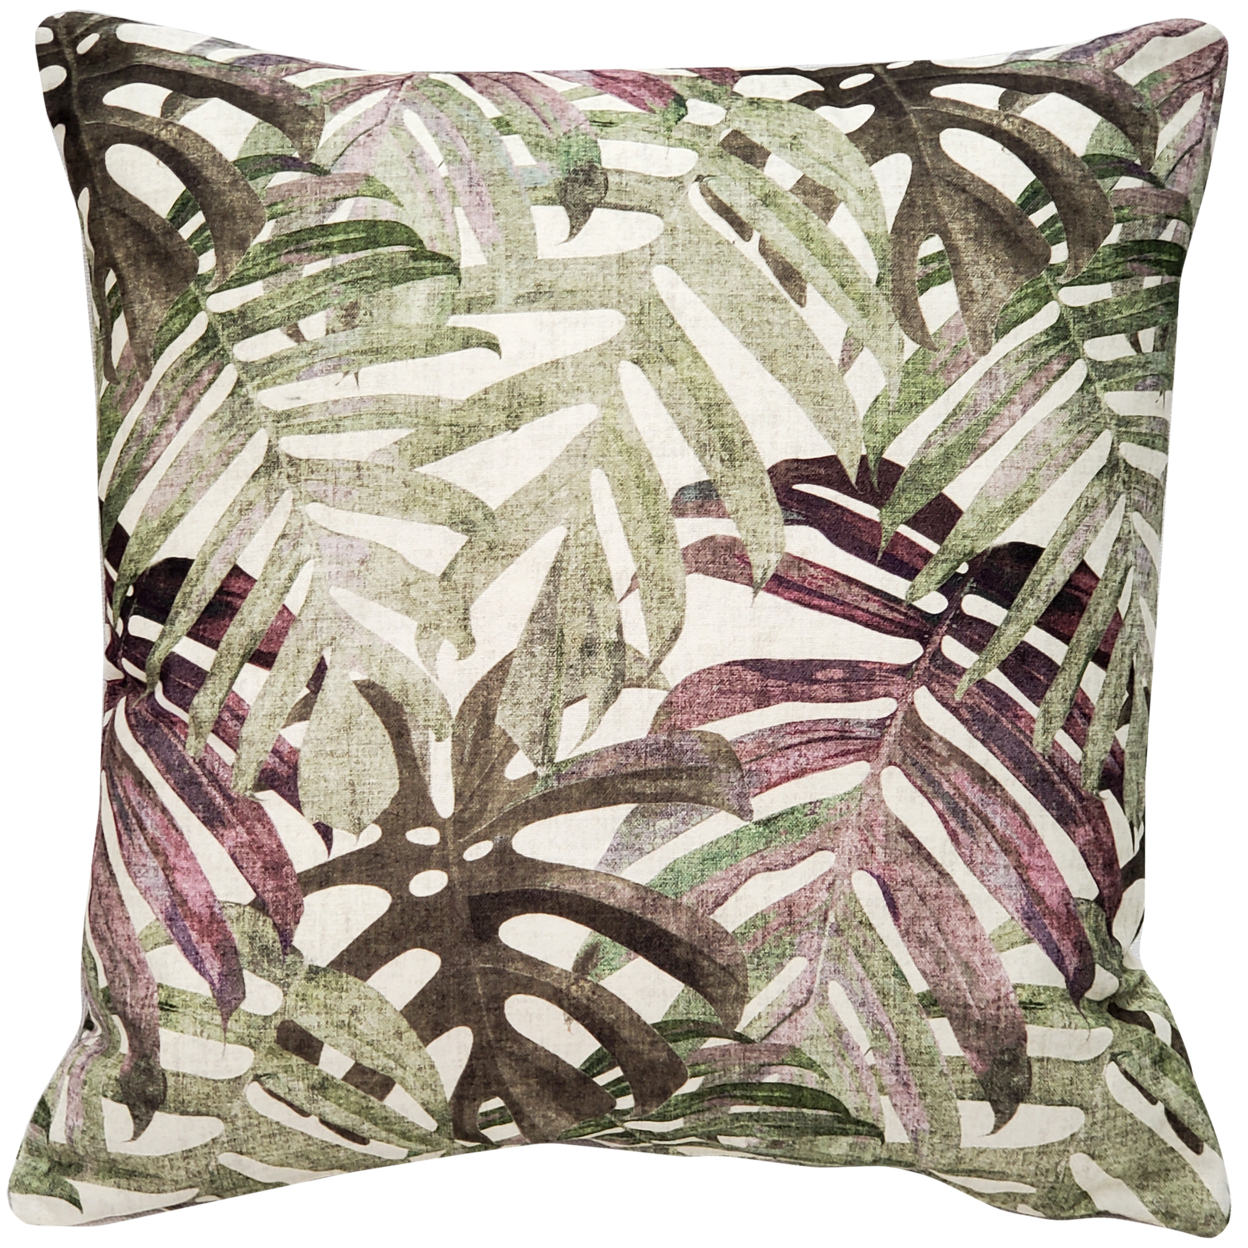 Pattaya Purple Palm Throw Pillow 20x20 Inches Square, Complete Pillow With Polyfill Pillow Insert